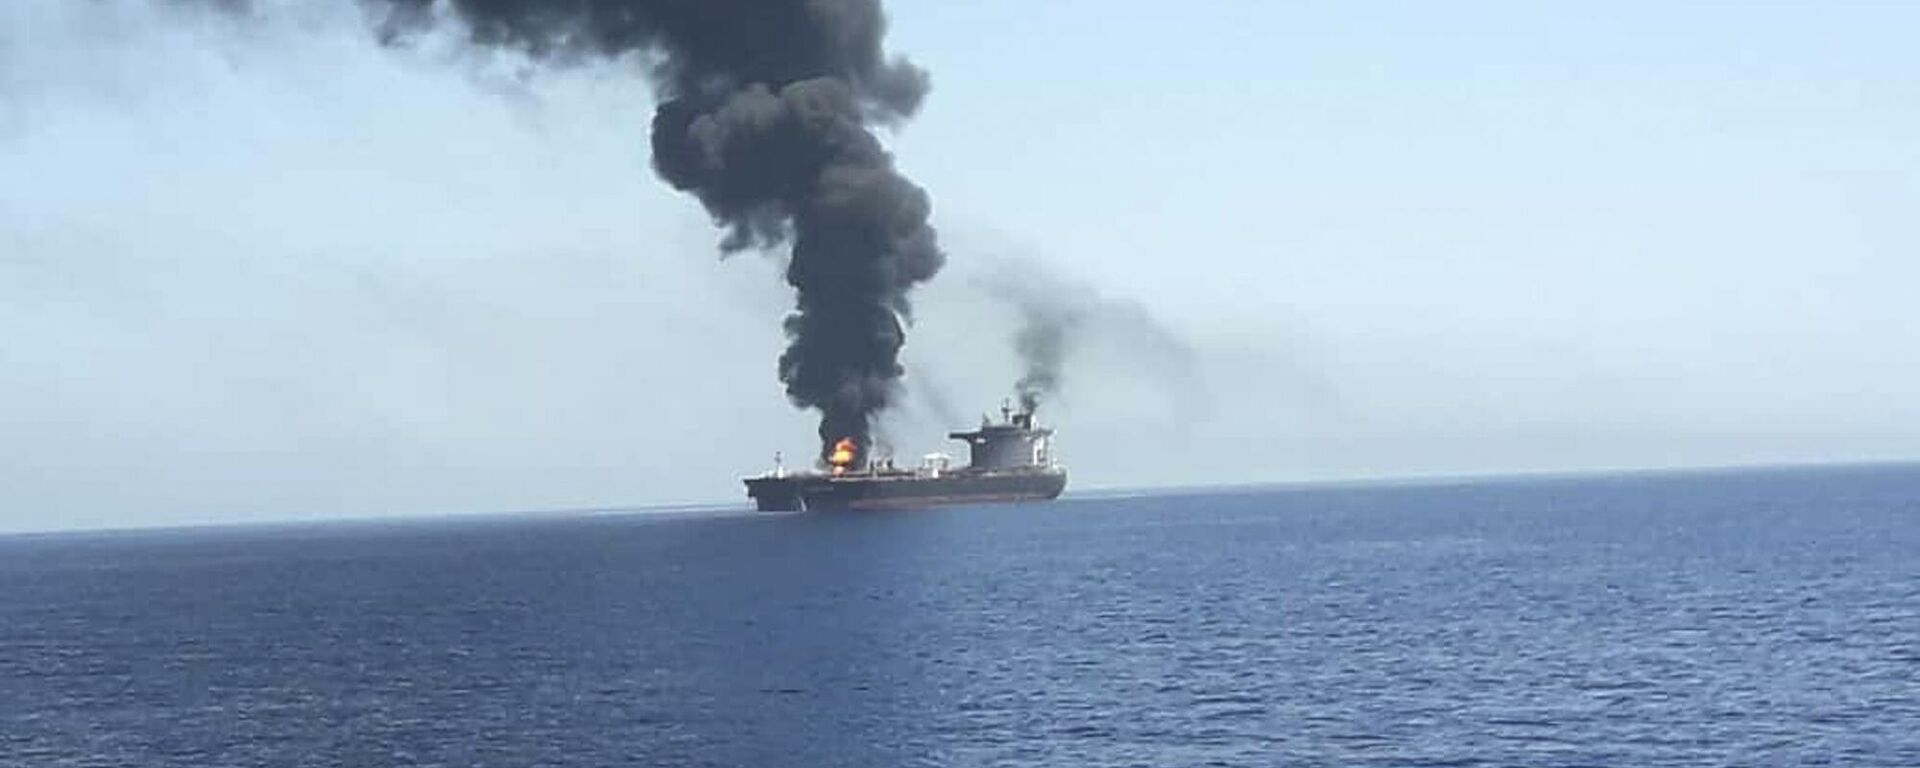 In this photo released by state-run IRIB News Agency, an oil tanker is on fire in the sea of Oman, Thursday, June 13, 2019 - Sputnik International, 1920, 06.03.2024